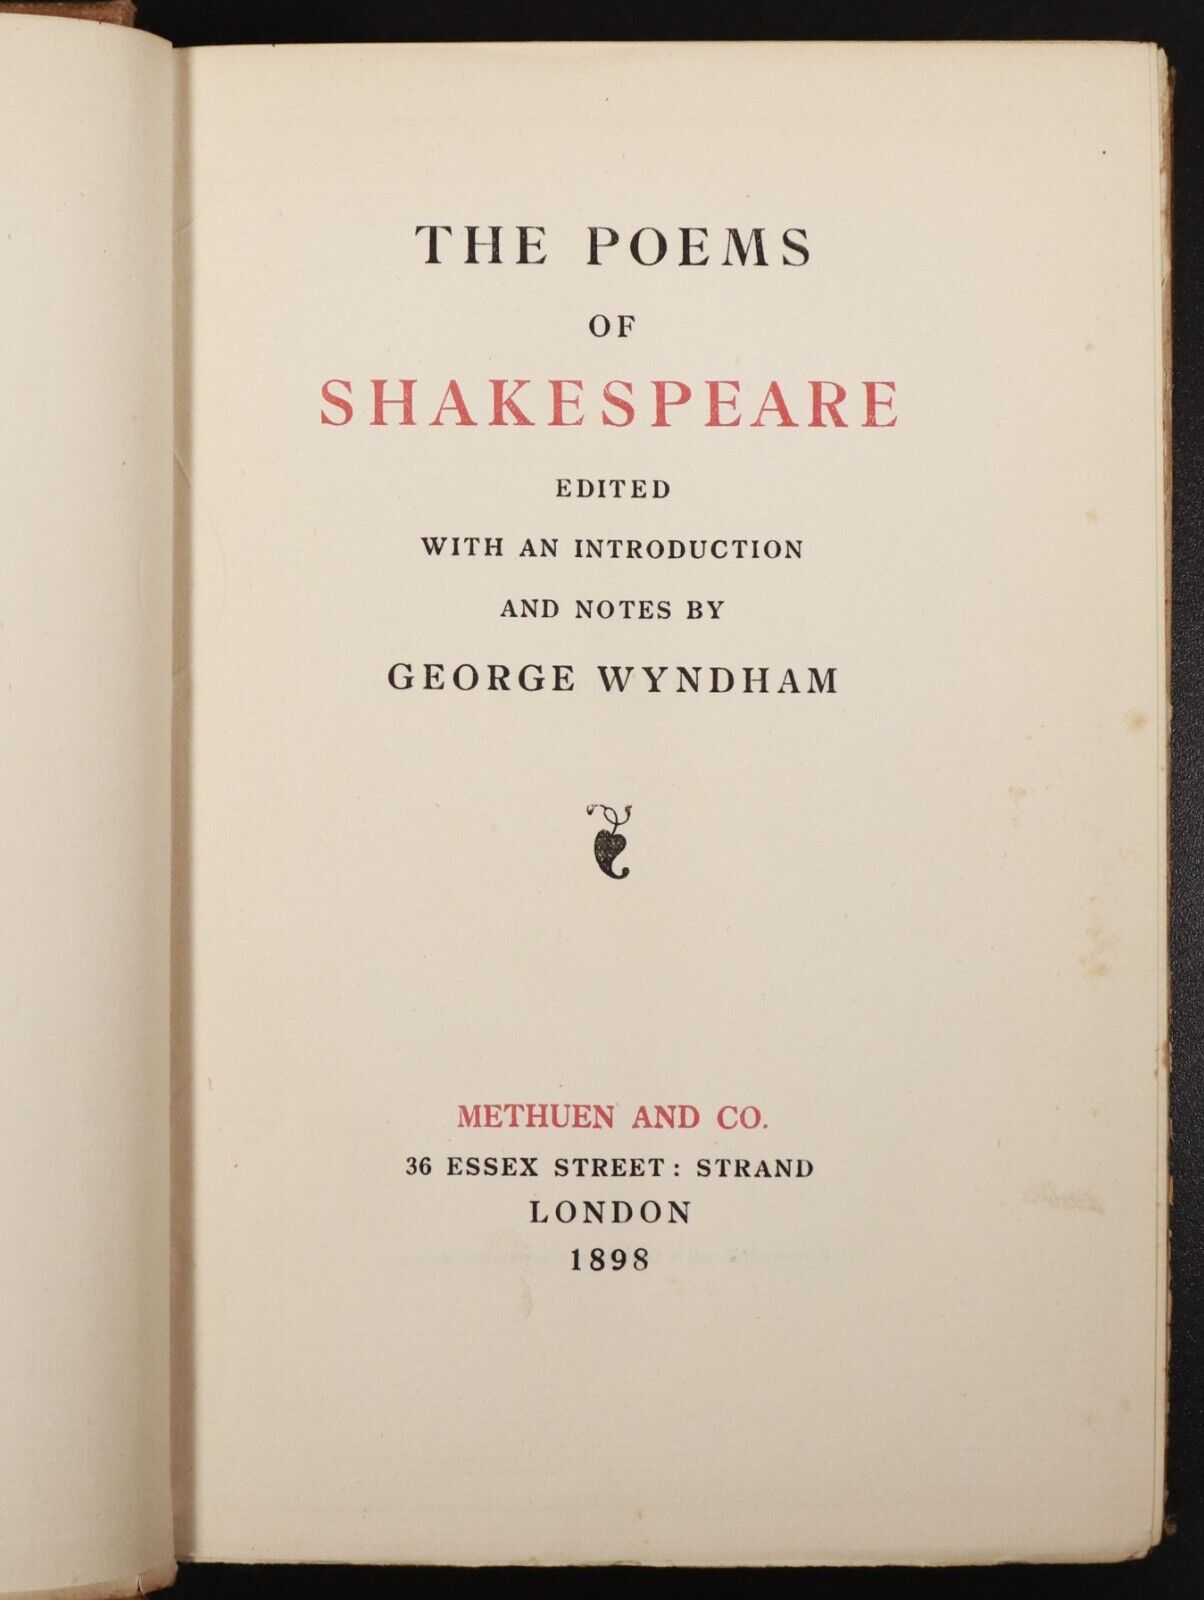 1898 The Poems Of Shakespeare Edited by George Wyndham Antique Poetry Book - 0